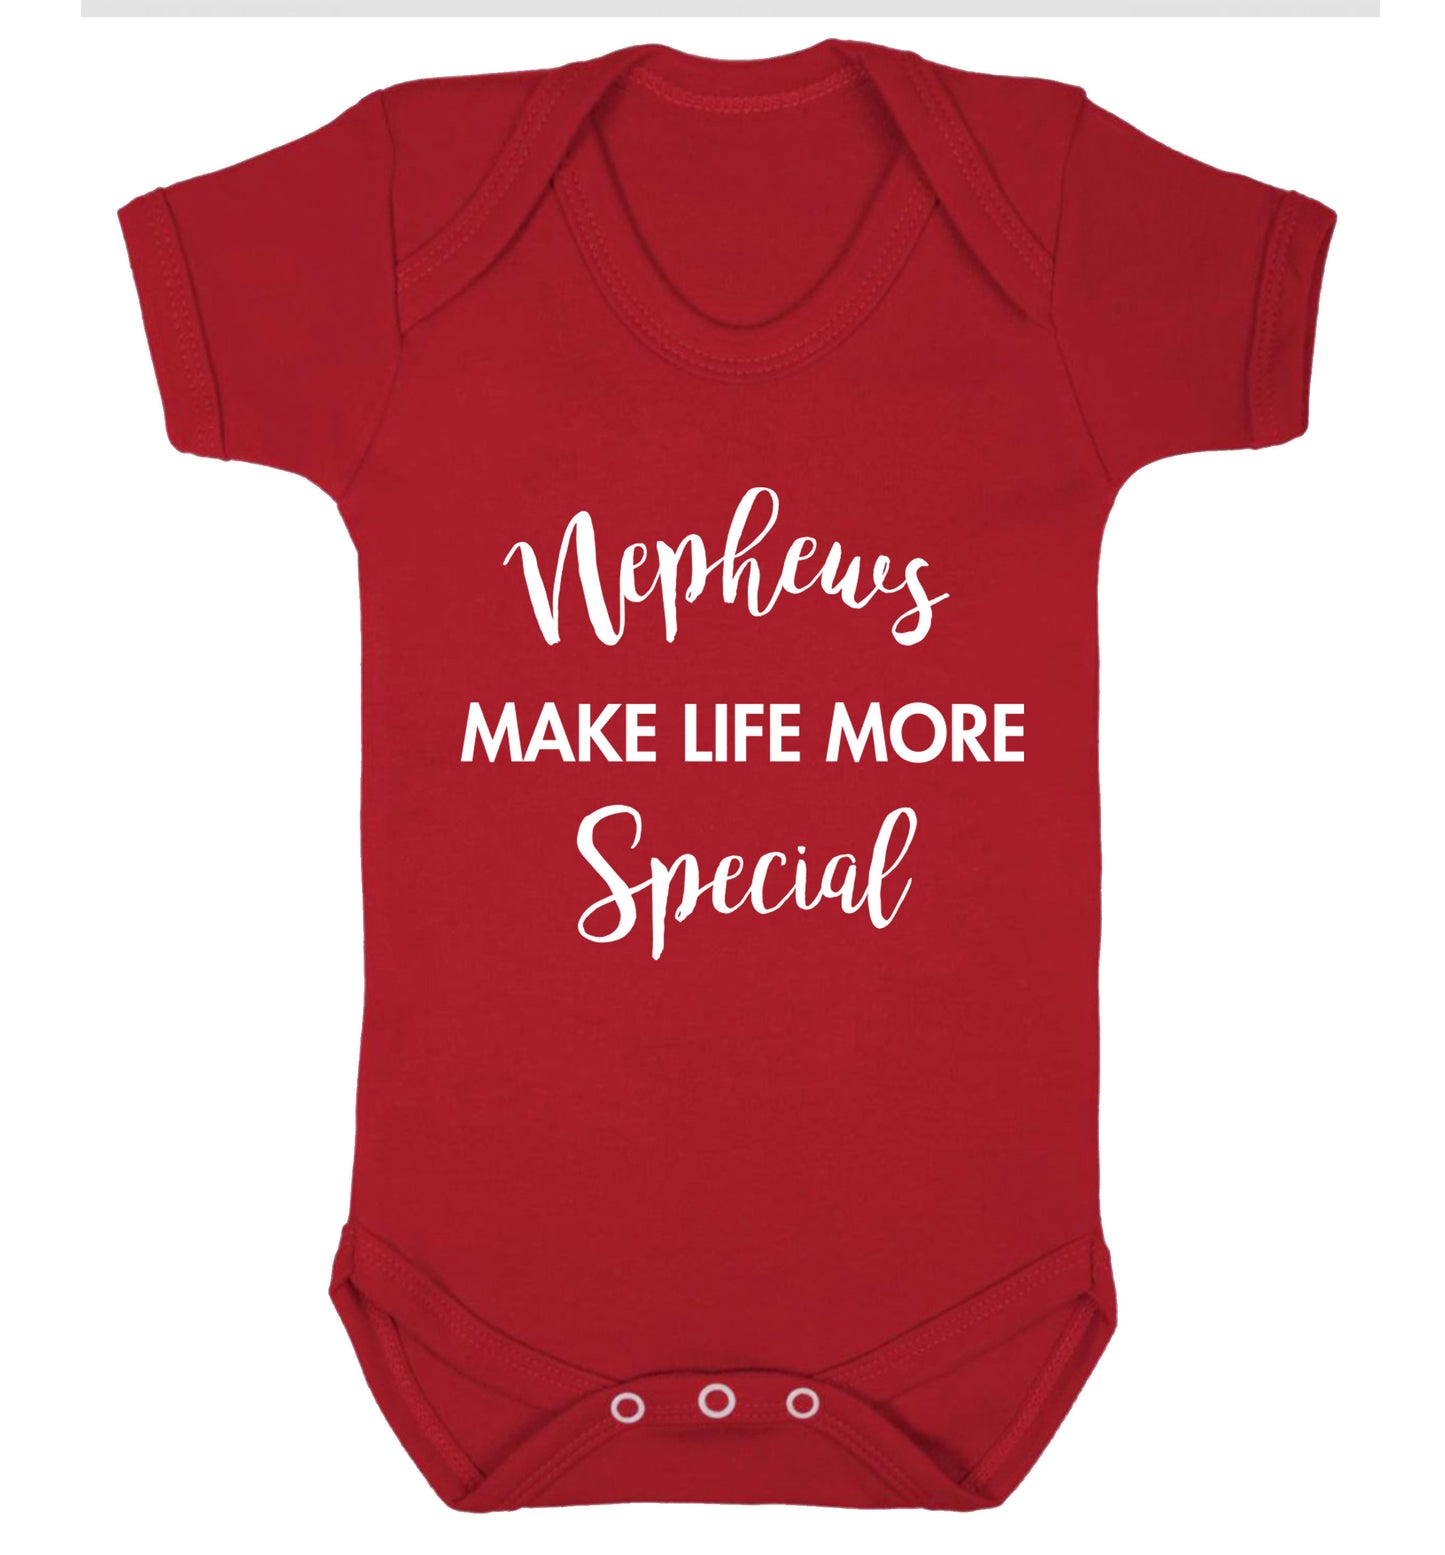 Nephews make life more special Baby Vest red 18-24 months